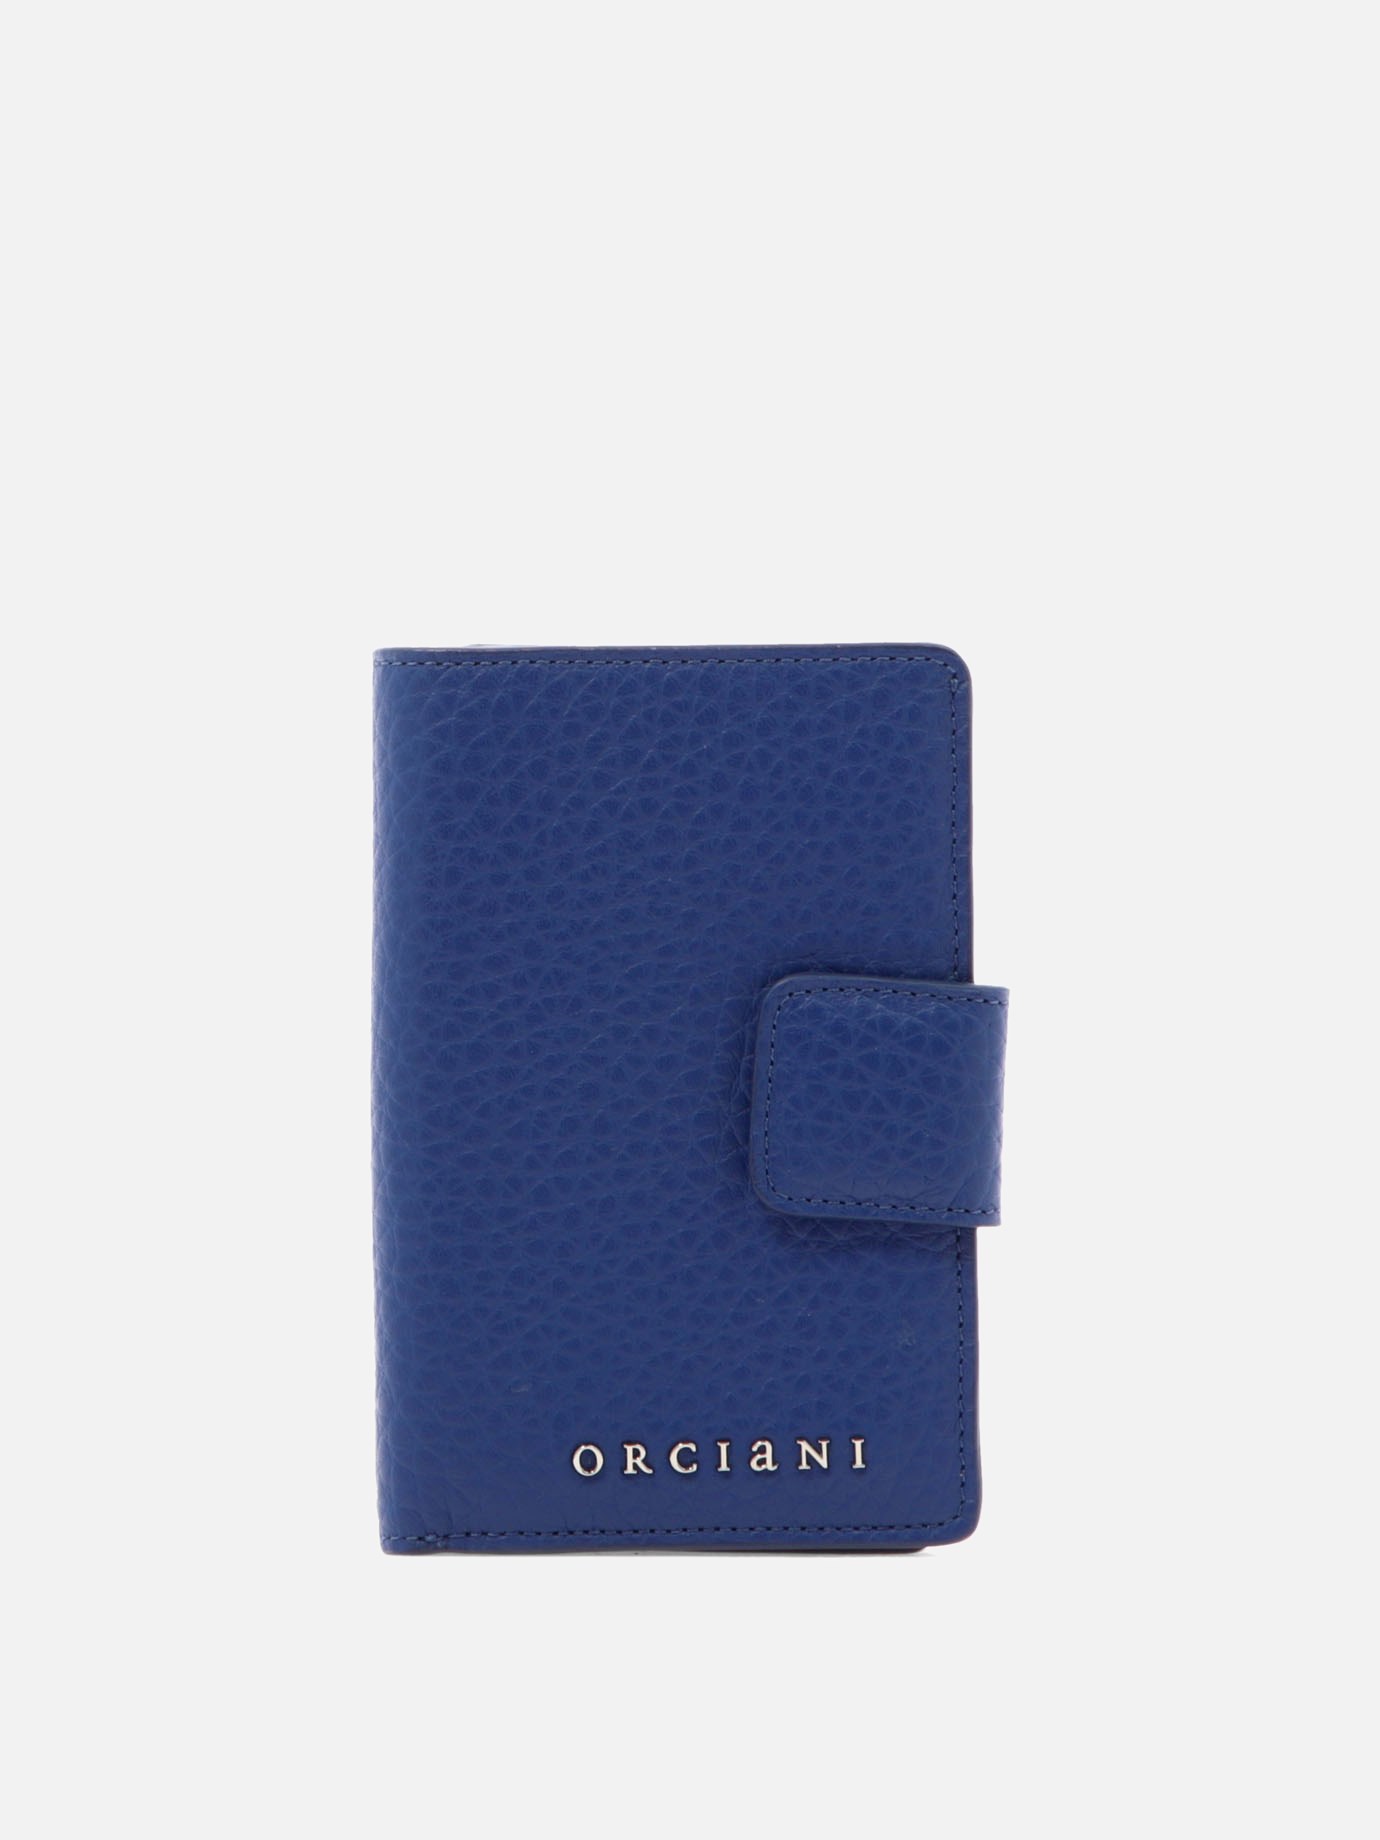 Bi-fold wallet with zipby Orciani - 1